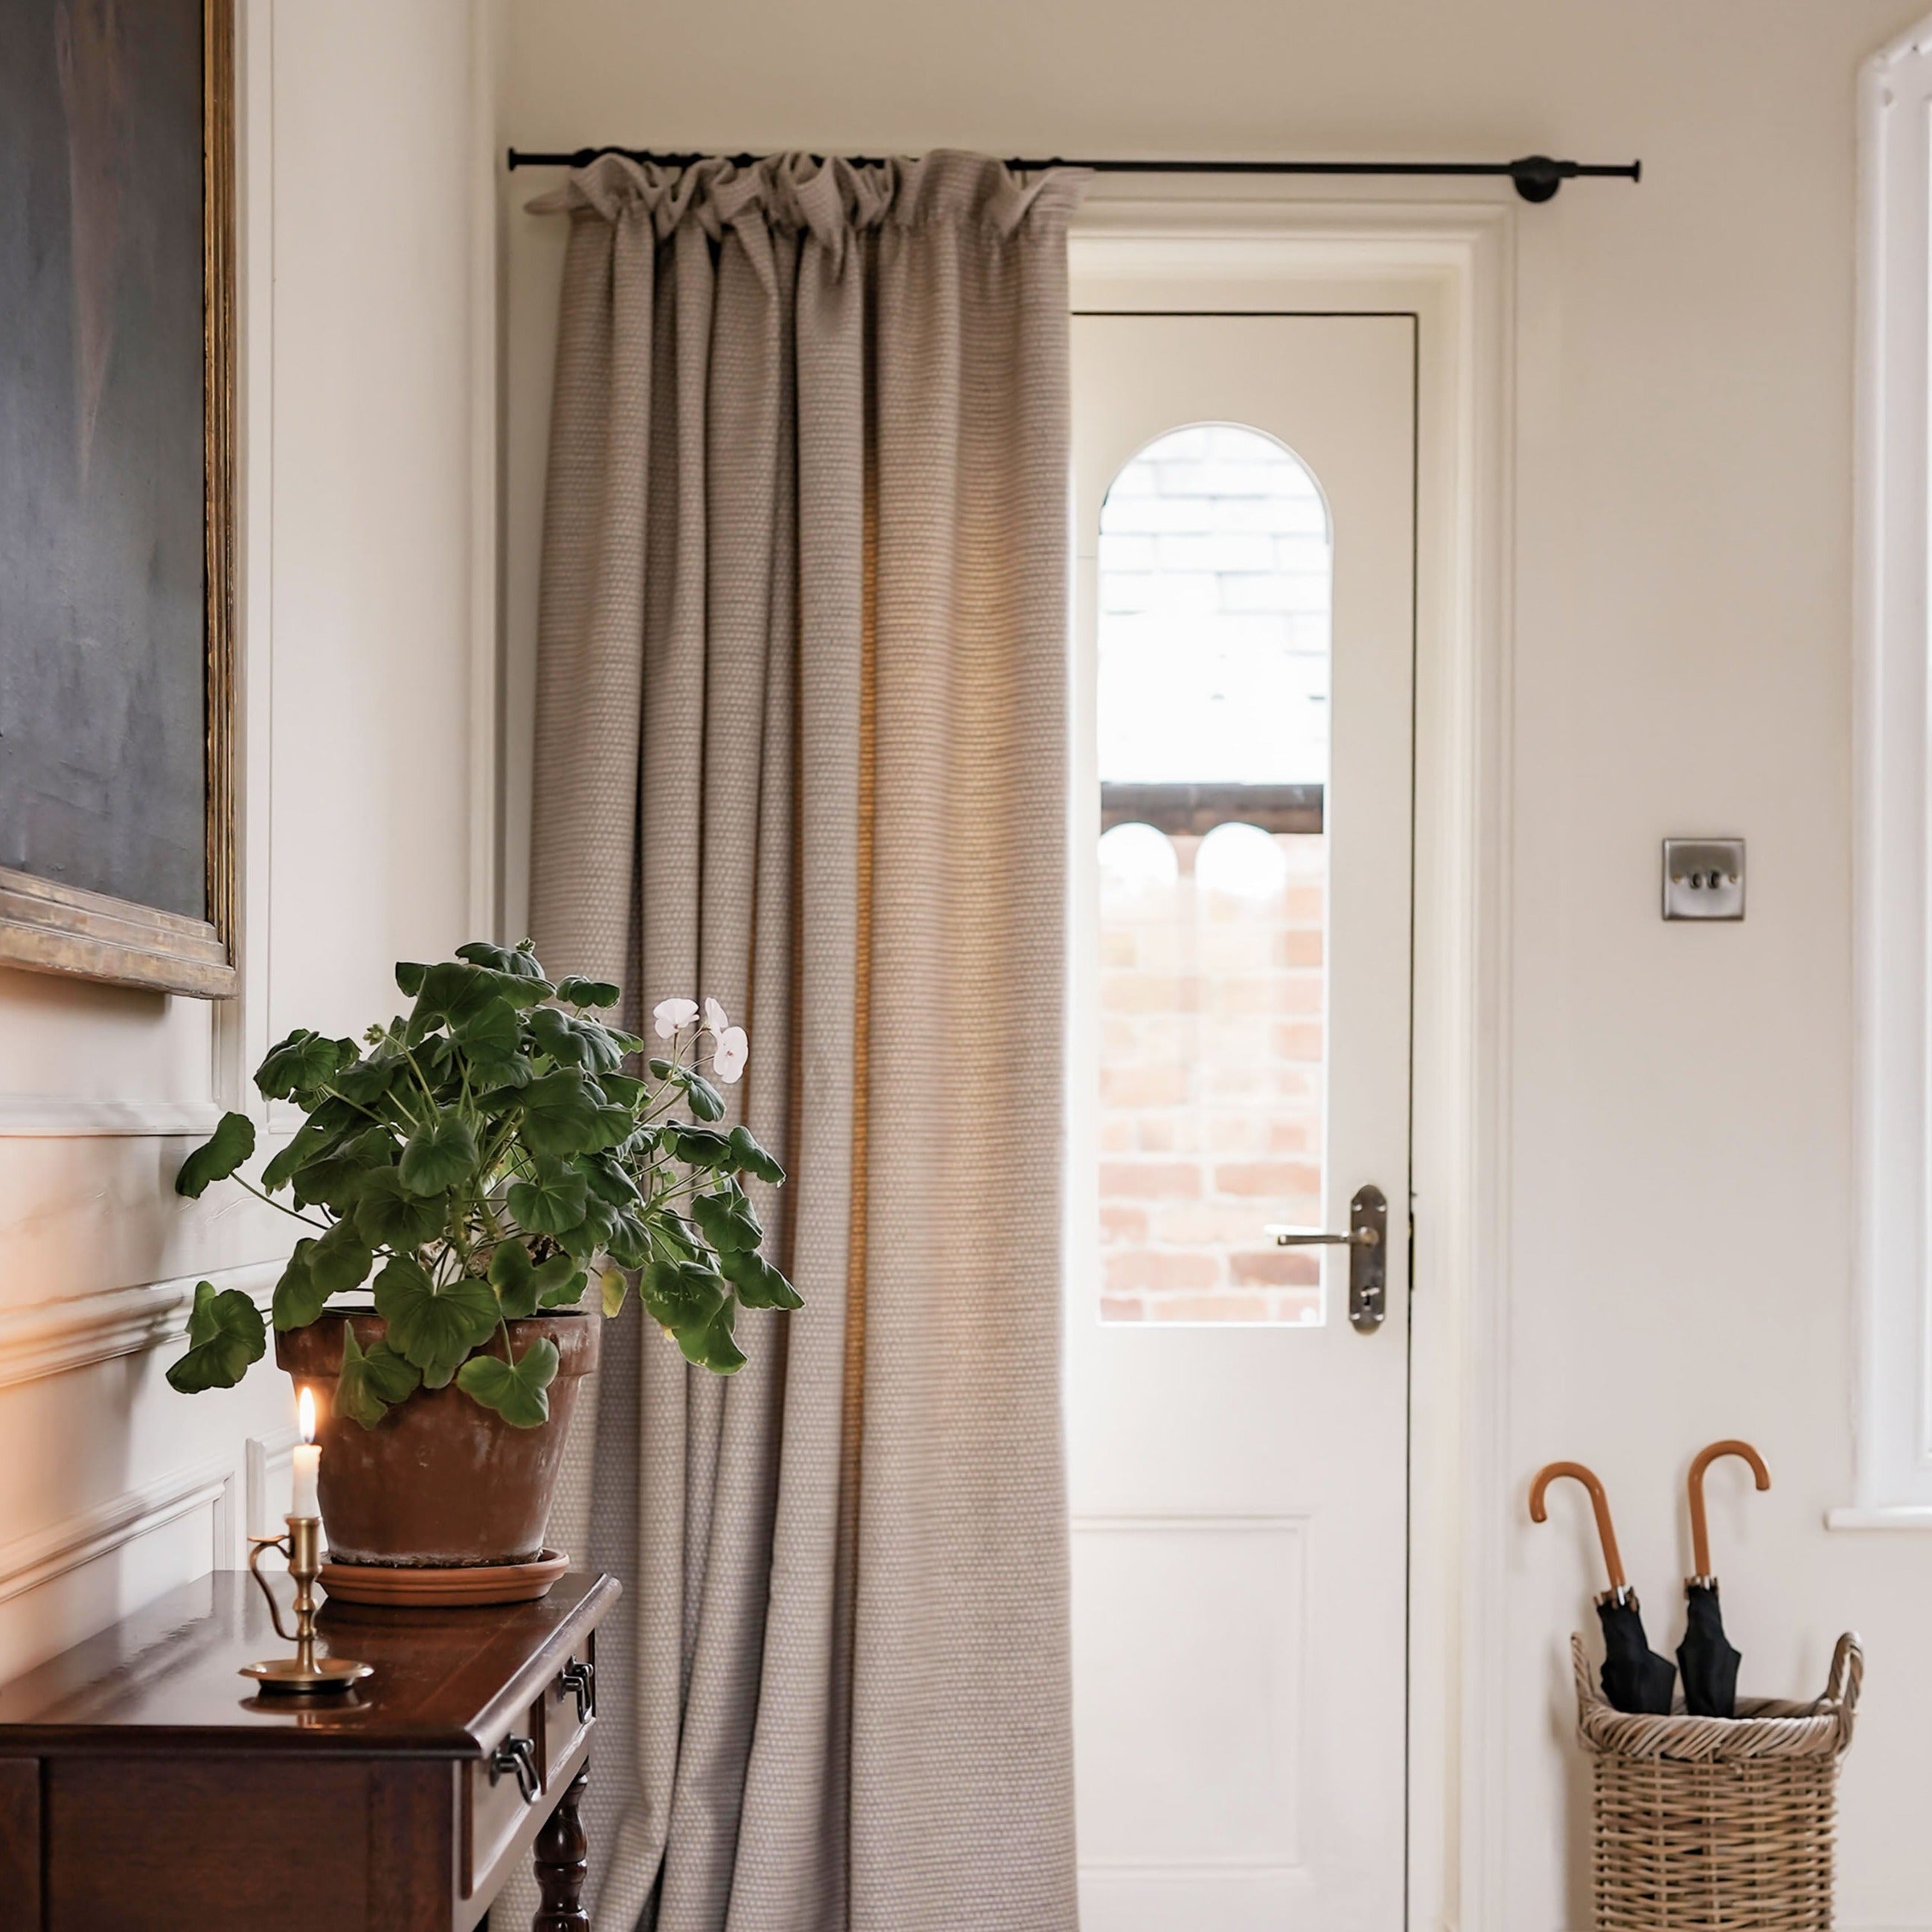 Ready Made Door Curtain - Clarendon Mushroom Wool, Cottage Pleat, Thermal Lined